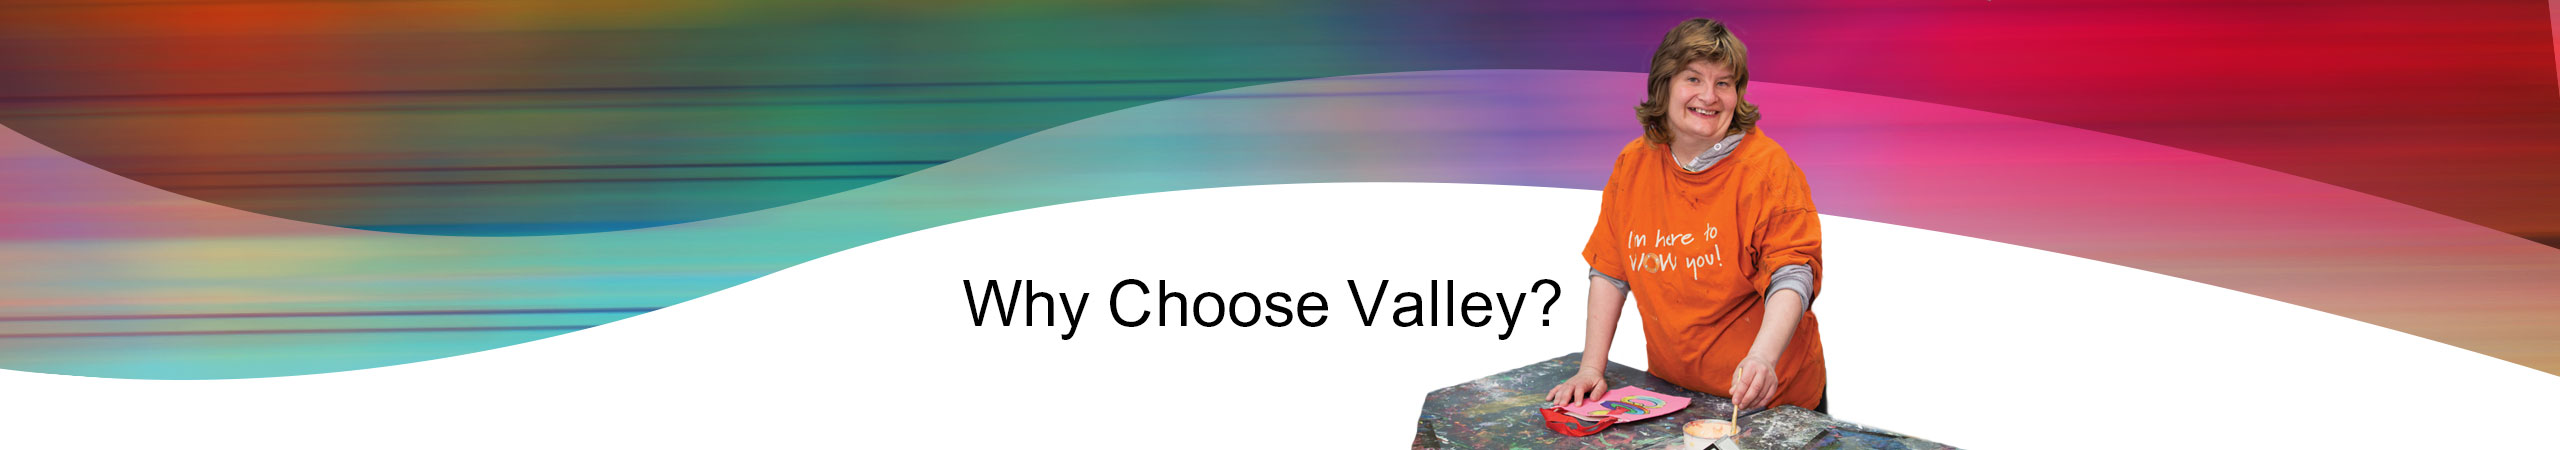 Why Choose Valley